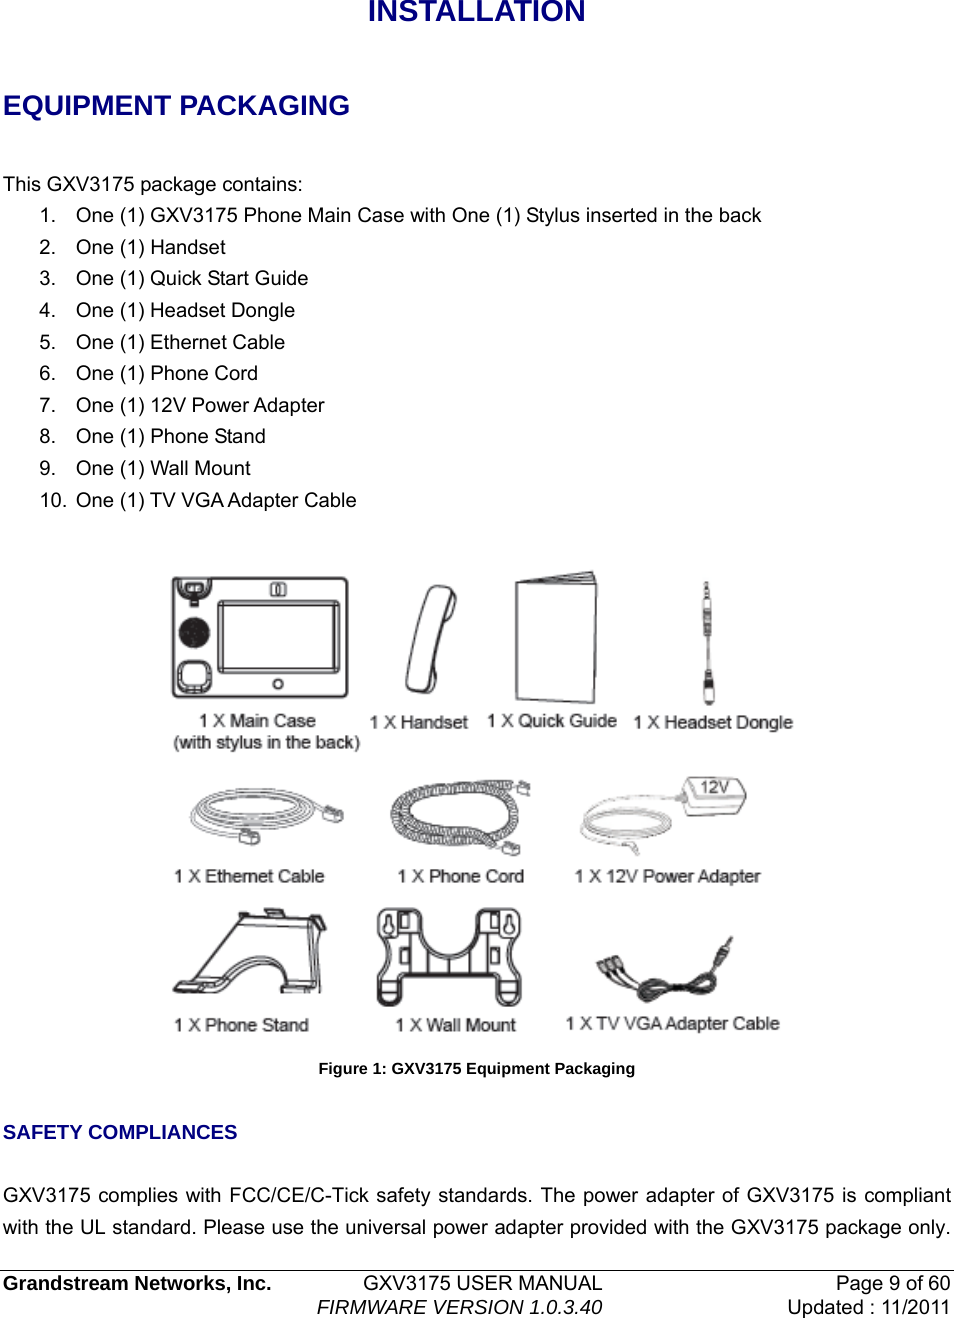  Grandstream Networks, Inc.         GXV3175 USER MANUAL  Page 9 of 60                                FIRMWARE VERSION 1.0.3.40 Updated : 11/2011    INSTALLATION  EQUIPMENT PACKAGING  This GXV3175 package contains: 1.  One (1) GXV3175 Phone Main Case with One (1) Stylus inserted in the back 2.  One (1) Handset 3.  One (1) Quick Start Guide 4.  One (1) Headset Dongle 5.  One (1) Ethernet Cable 6.  One (1) Phone Cord   7.  One (1) 12V Power Adapter 8.  One (1) Phone Stand 9.  One (1) Wall Mount 10.  One (1) TV VGA Adapter Cable   Figure 1: GXV3175 Equipment Packaging  SAFETY COMPLIANCES  GXV3175 complies with FCC/CE/C-Tick safety standards. The power adapter of GXV3175 is compliant with the UL standard. Please use the universal power adapter provided with the GXV3175 package only.   